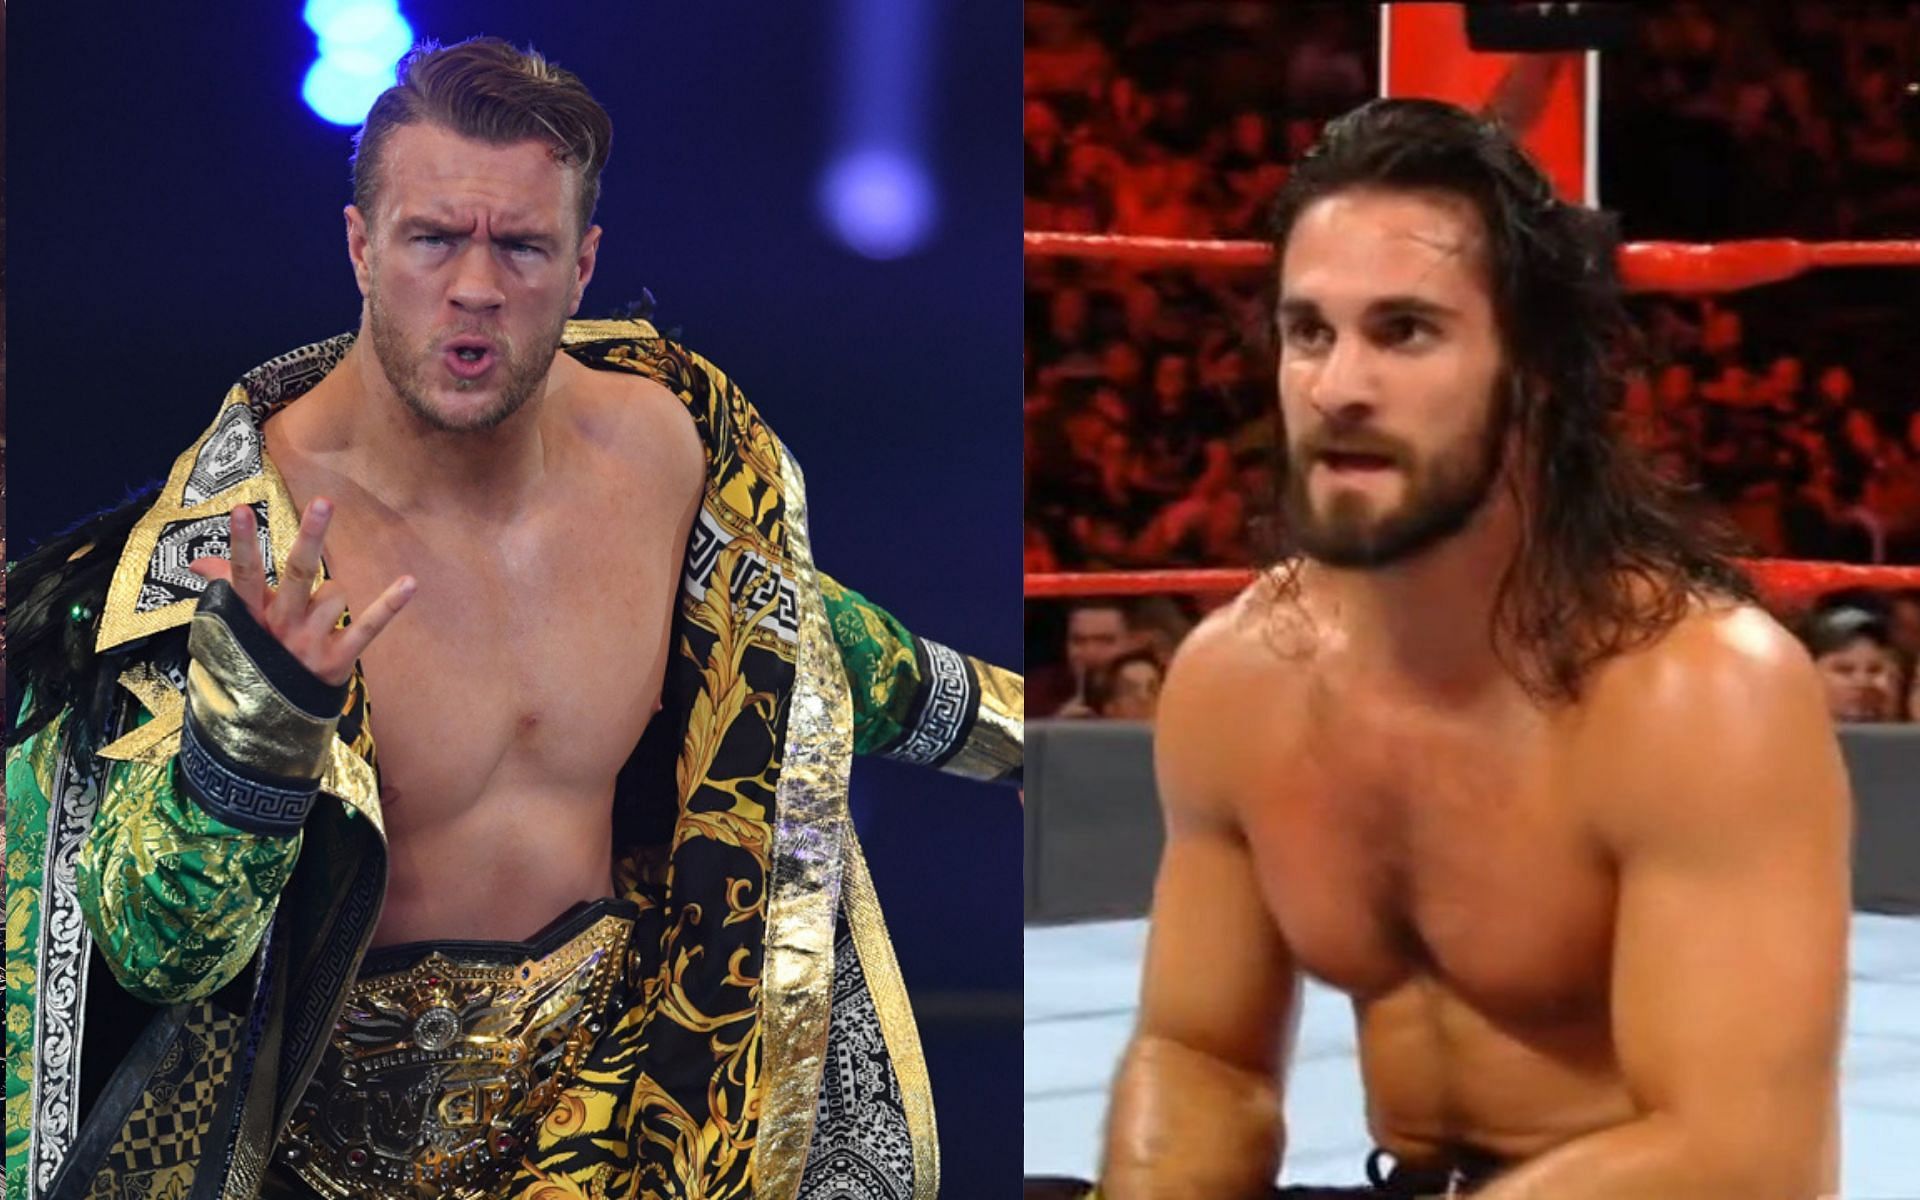 Will Ospreay and Seth Rollins have a history of sparring with each other online